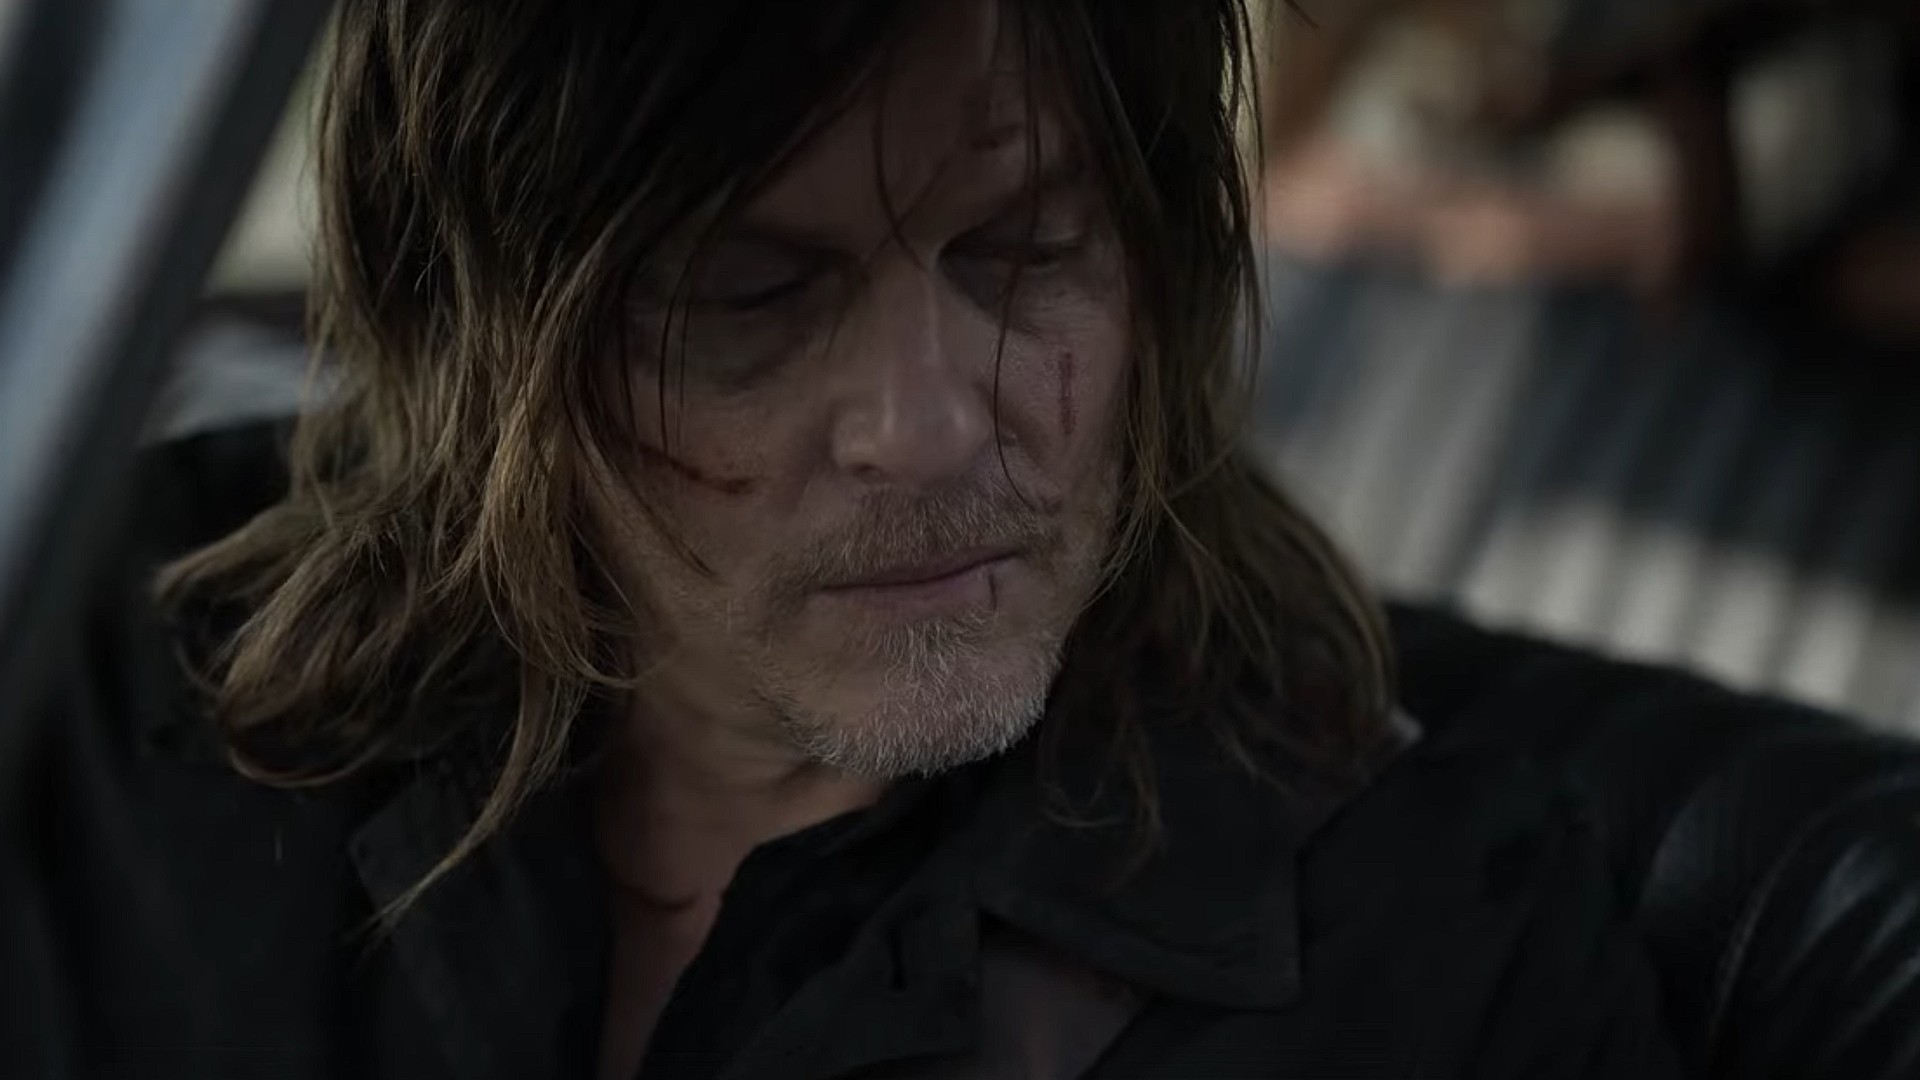  New The Walking Dead: Daryl Dixon season 2 trailer teases romance, Carol's chaotic journey to France, and glow-in-the-dark zombies 